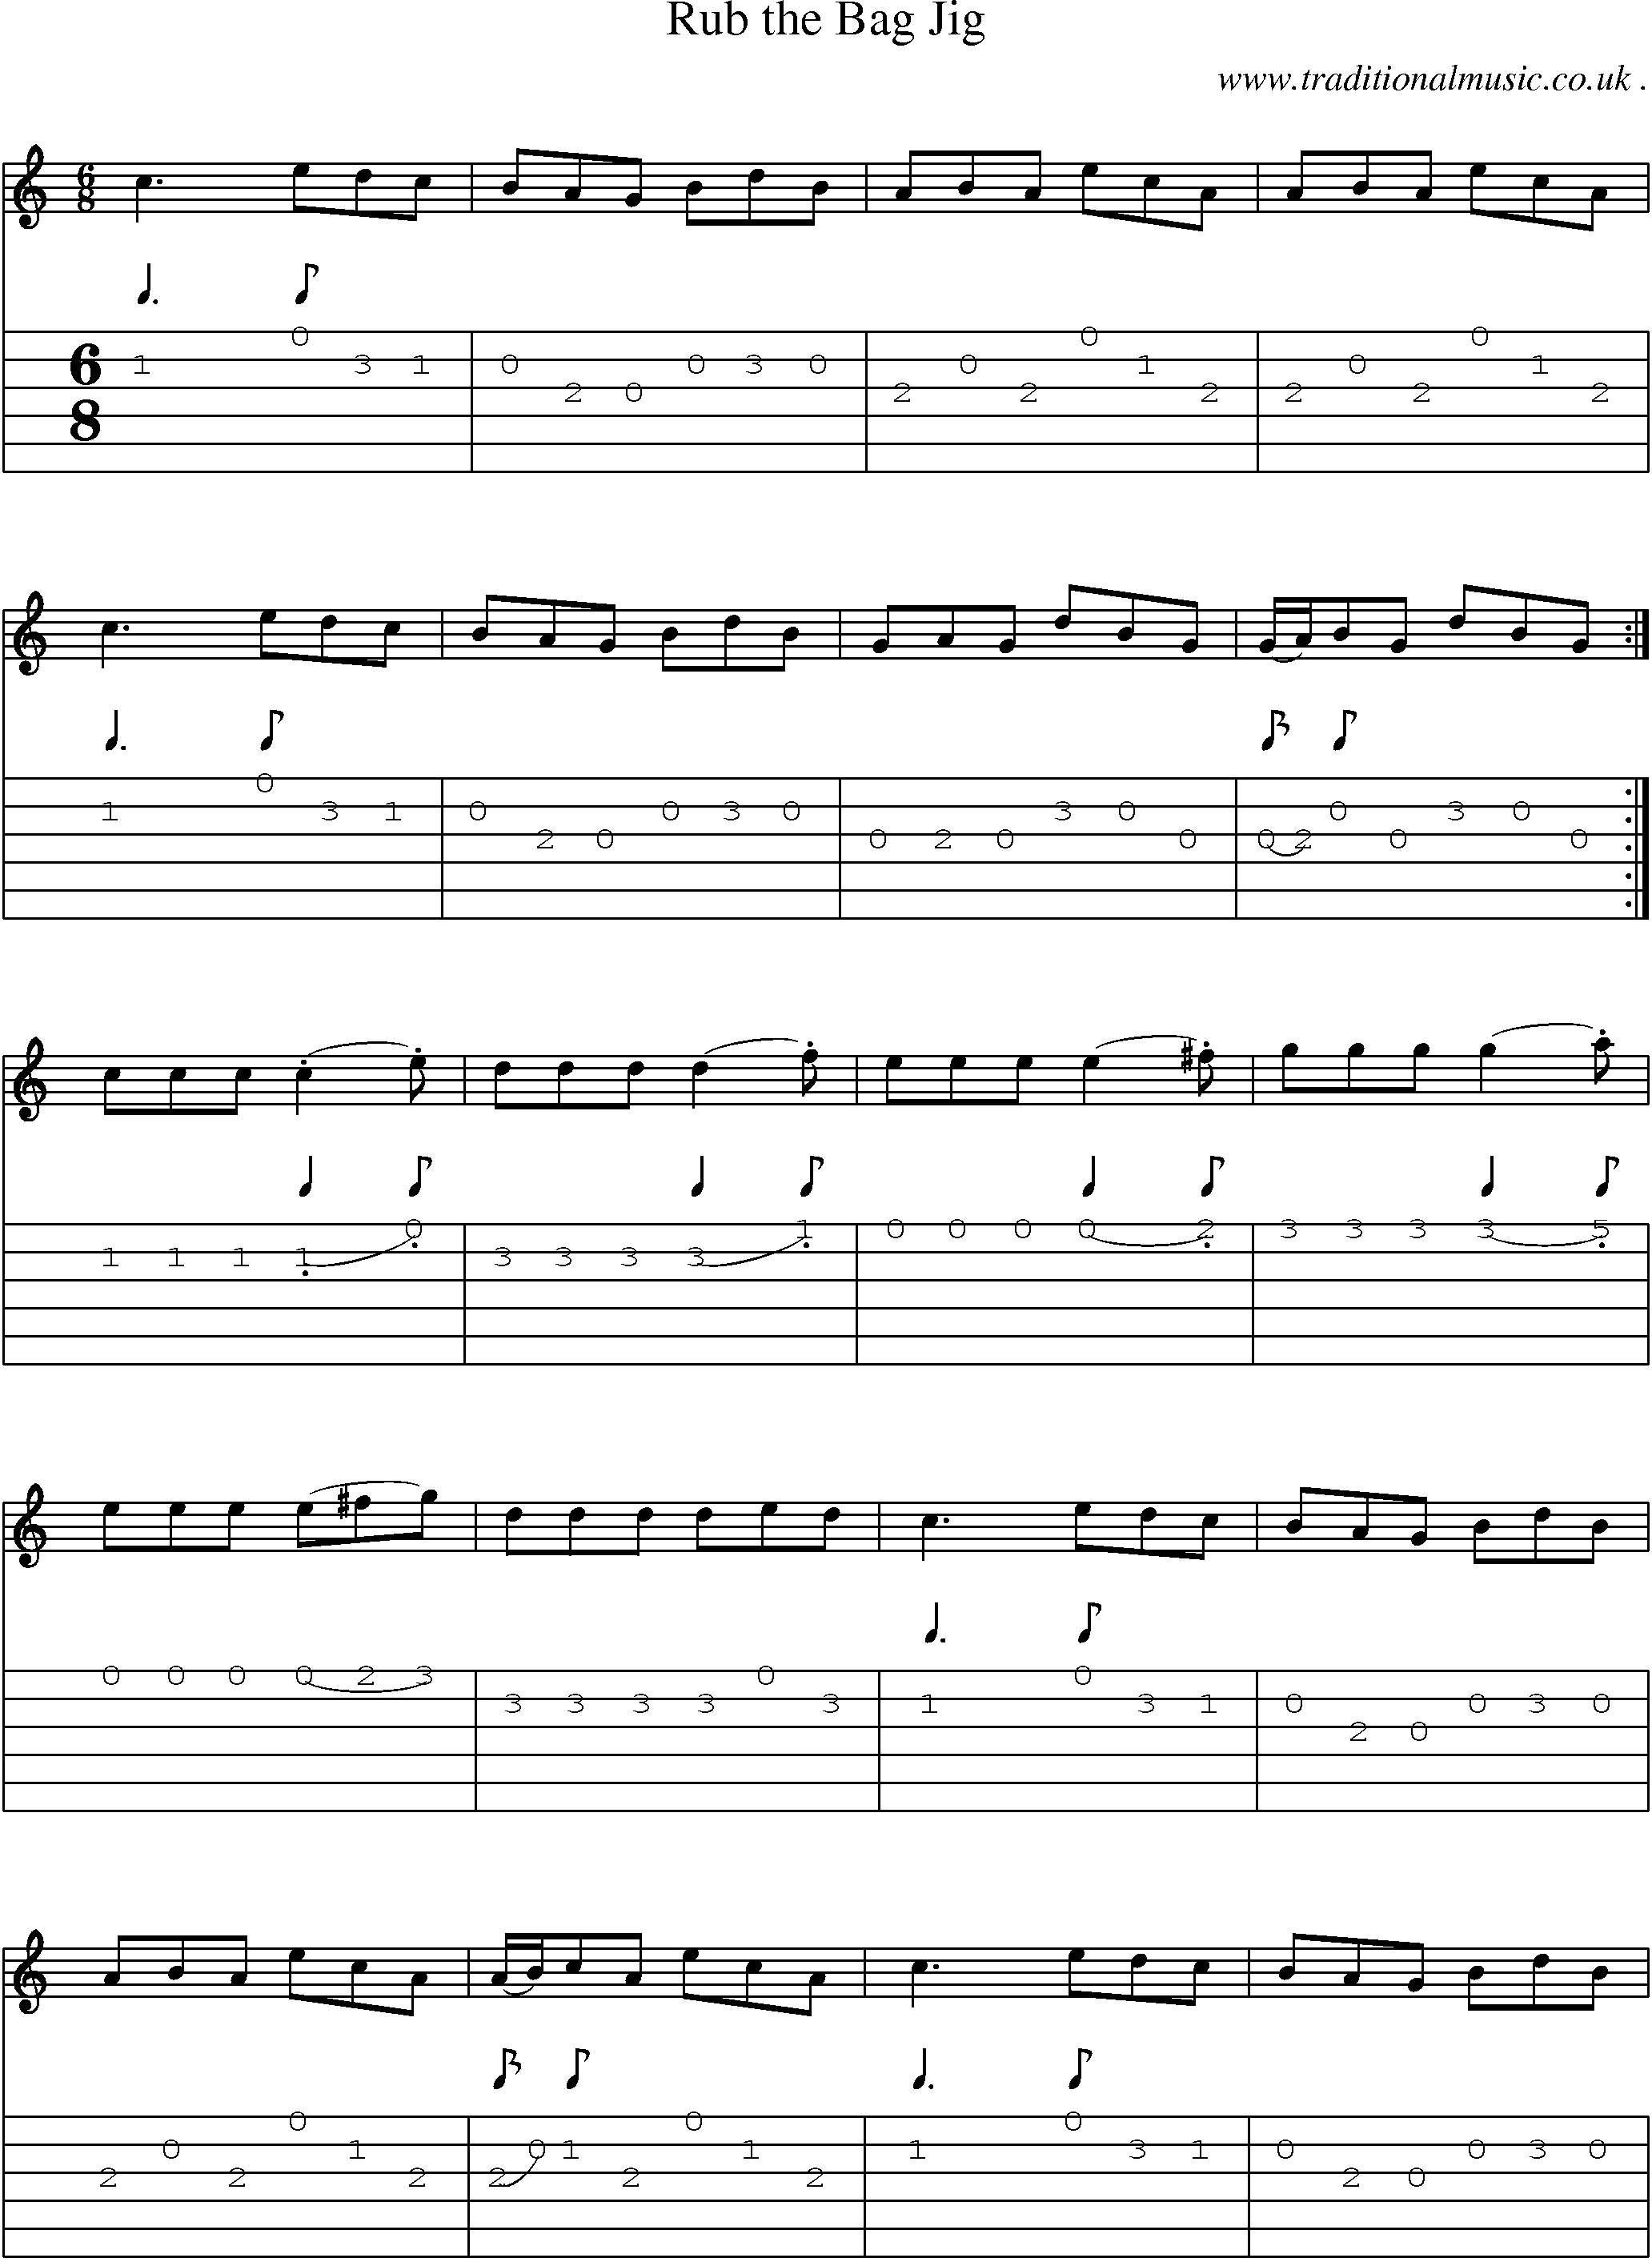 Sheet-Music and Guitar Tabs for Rub The Bag Jig